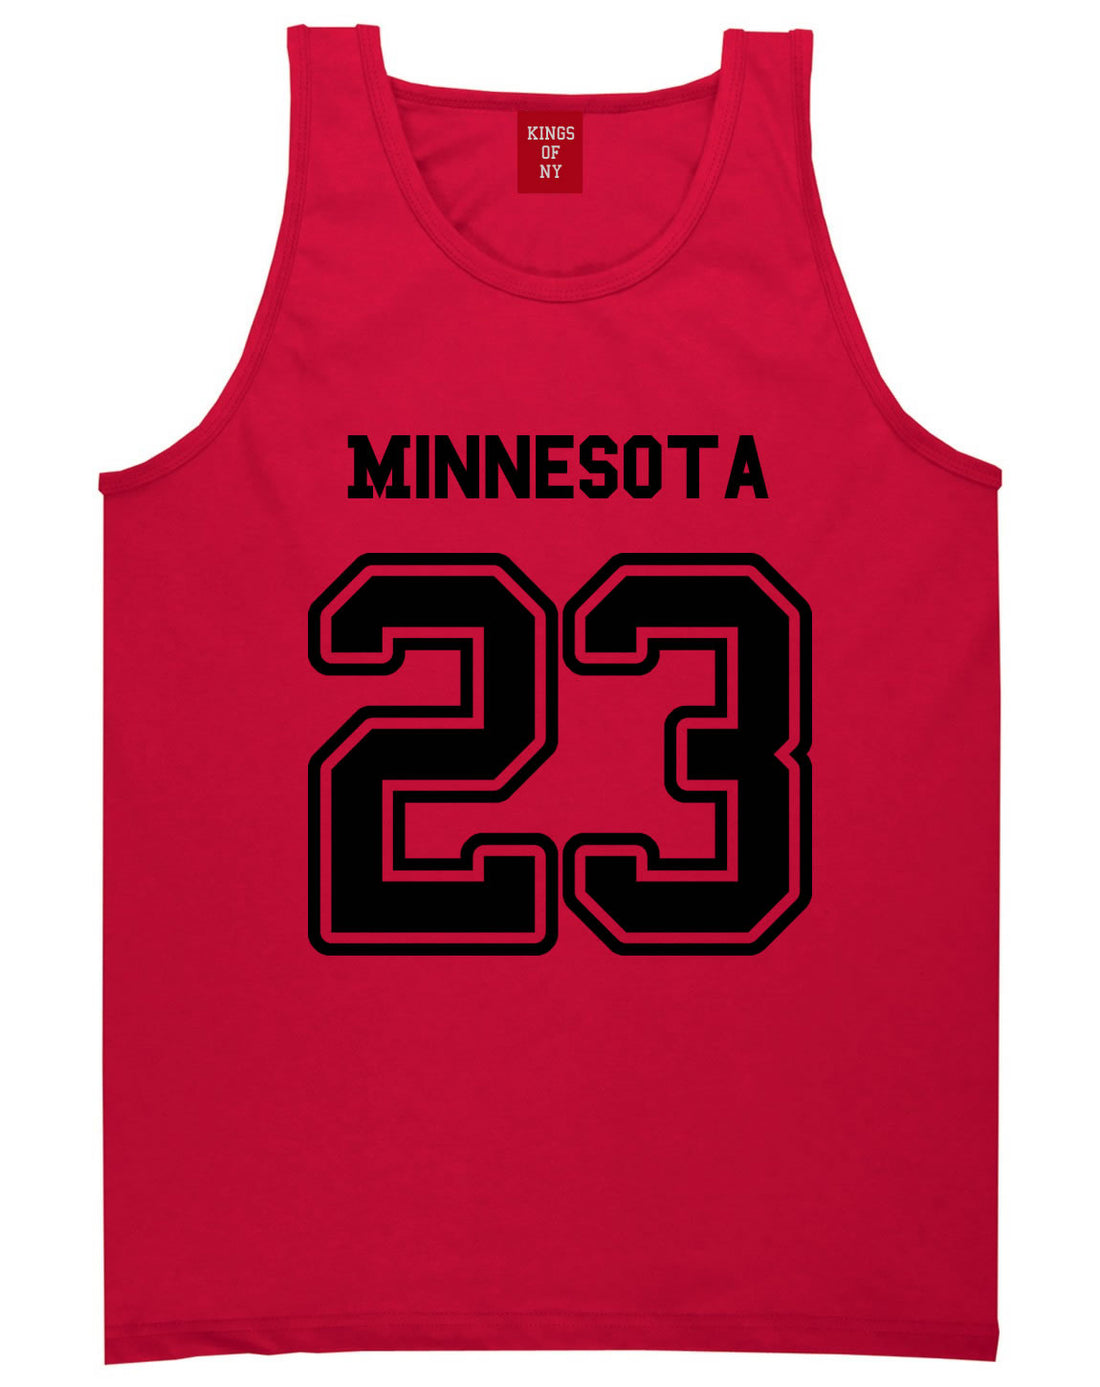 Sport Style Minnestoa 23 Team State Jersey Mens Tank Top By Kings Of NY